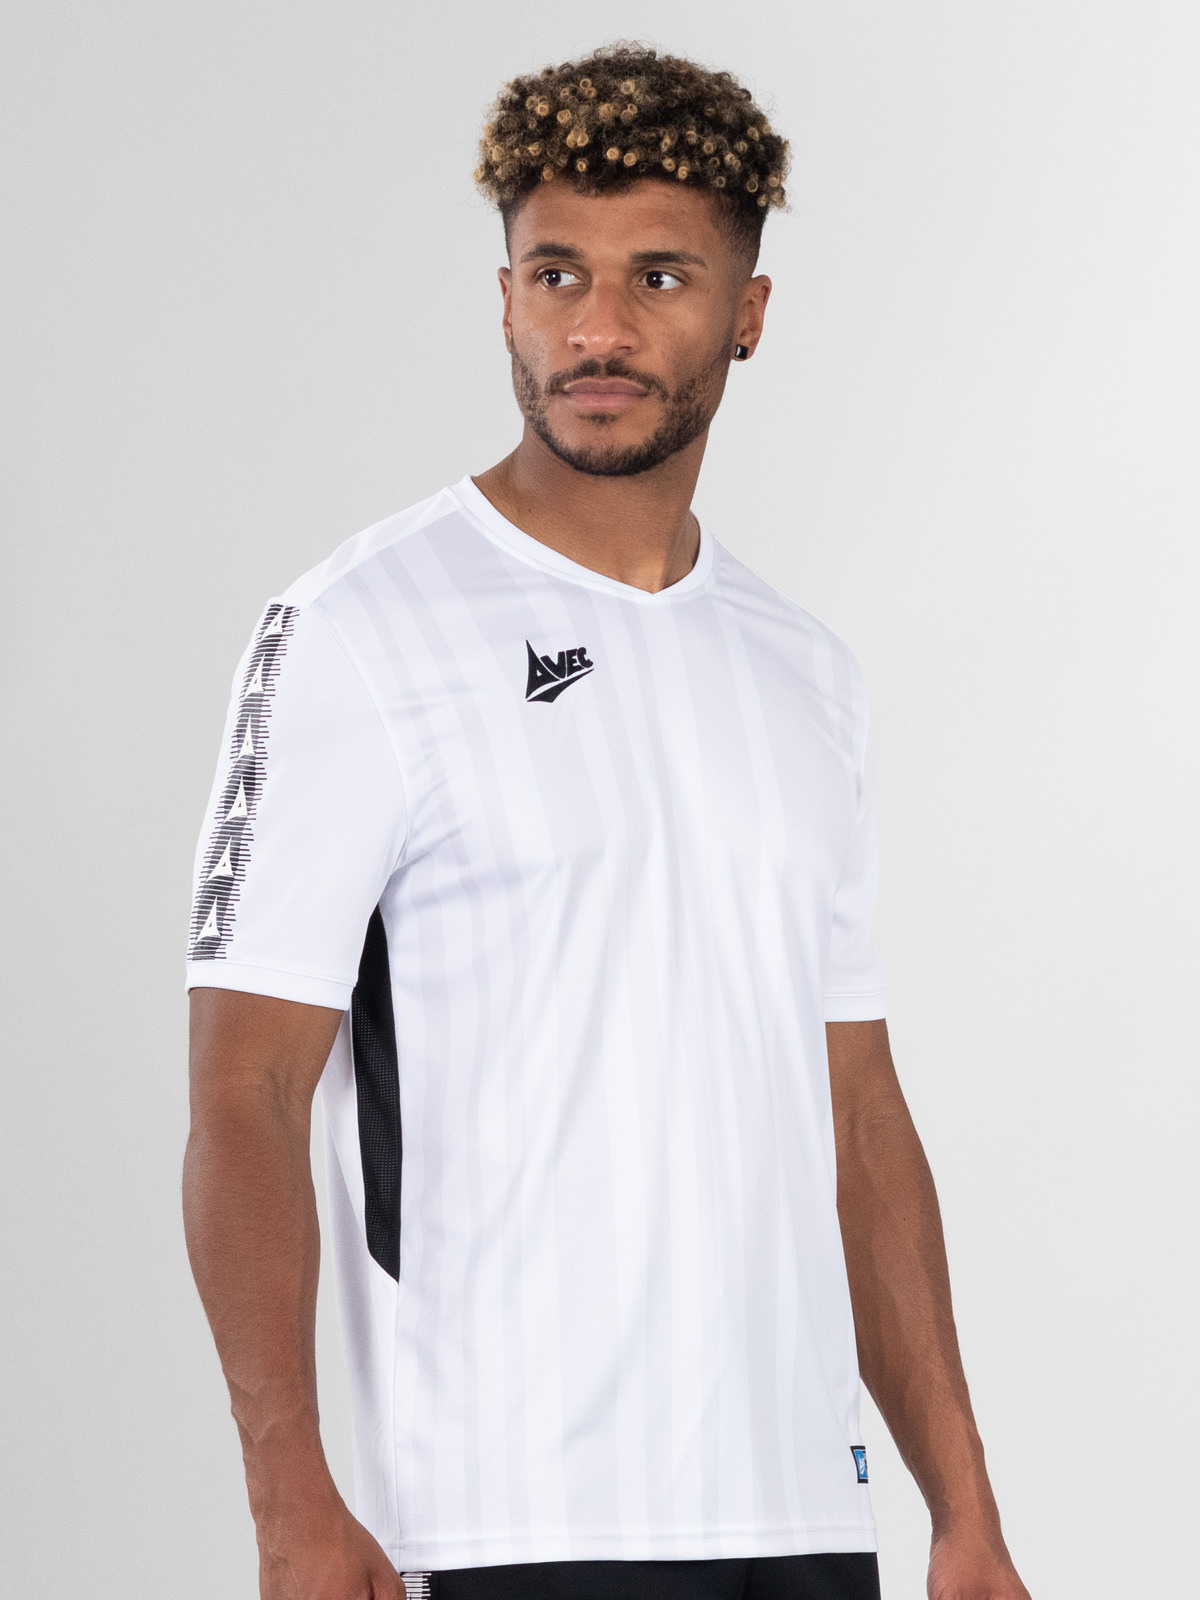 picture of shade jersey - white/black